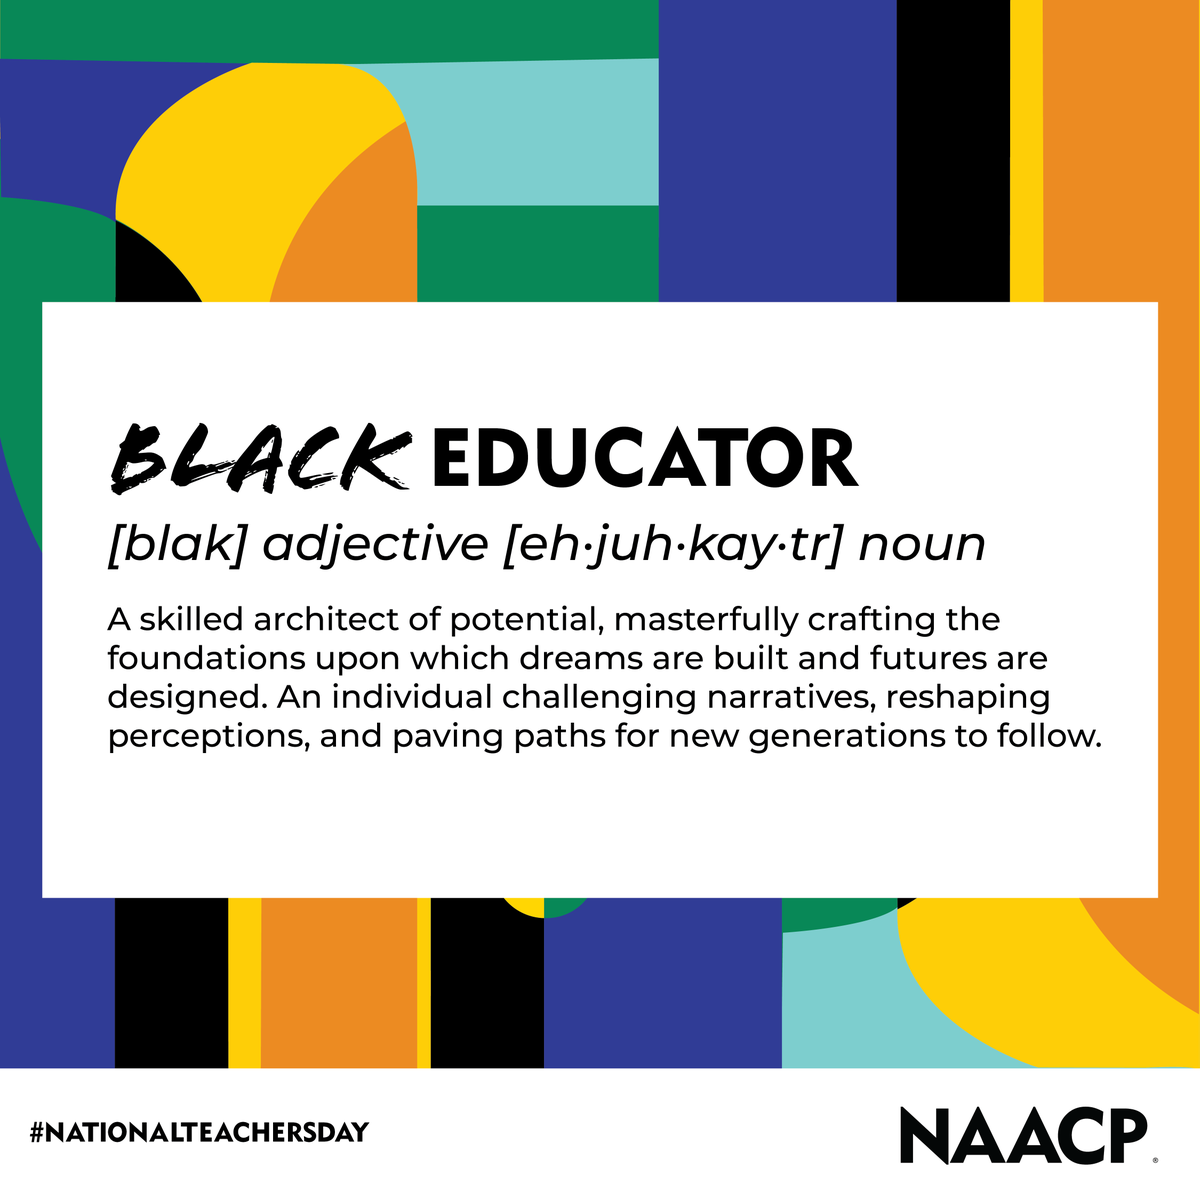 To our Black educators: Your influence extends far beyond your classroom walls. You instill confidence, foster creativity, and ignite curiosity in your students that drives lifelong learning. Today, we celebrate you! 👩🏾‍🏫📚👨🏾‍🏫 #NationalTeachersDay